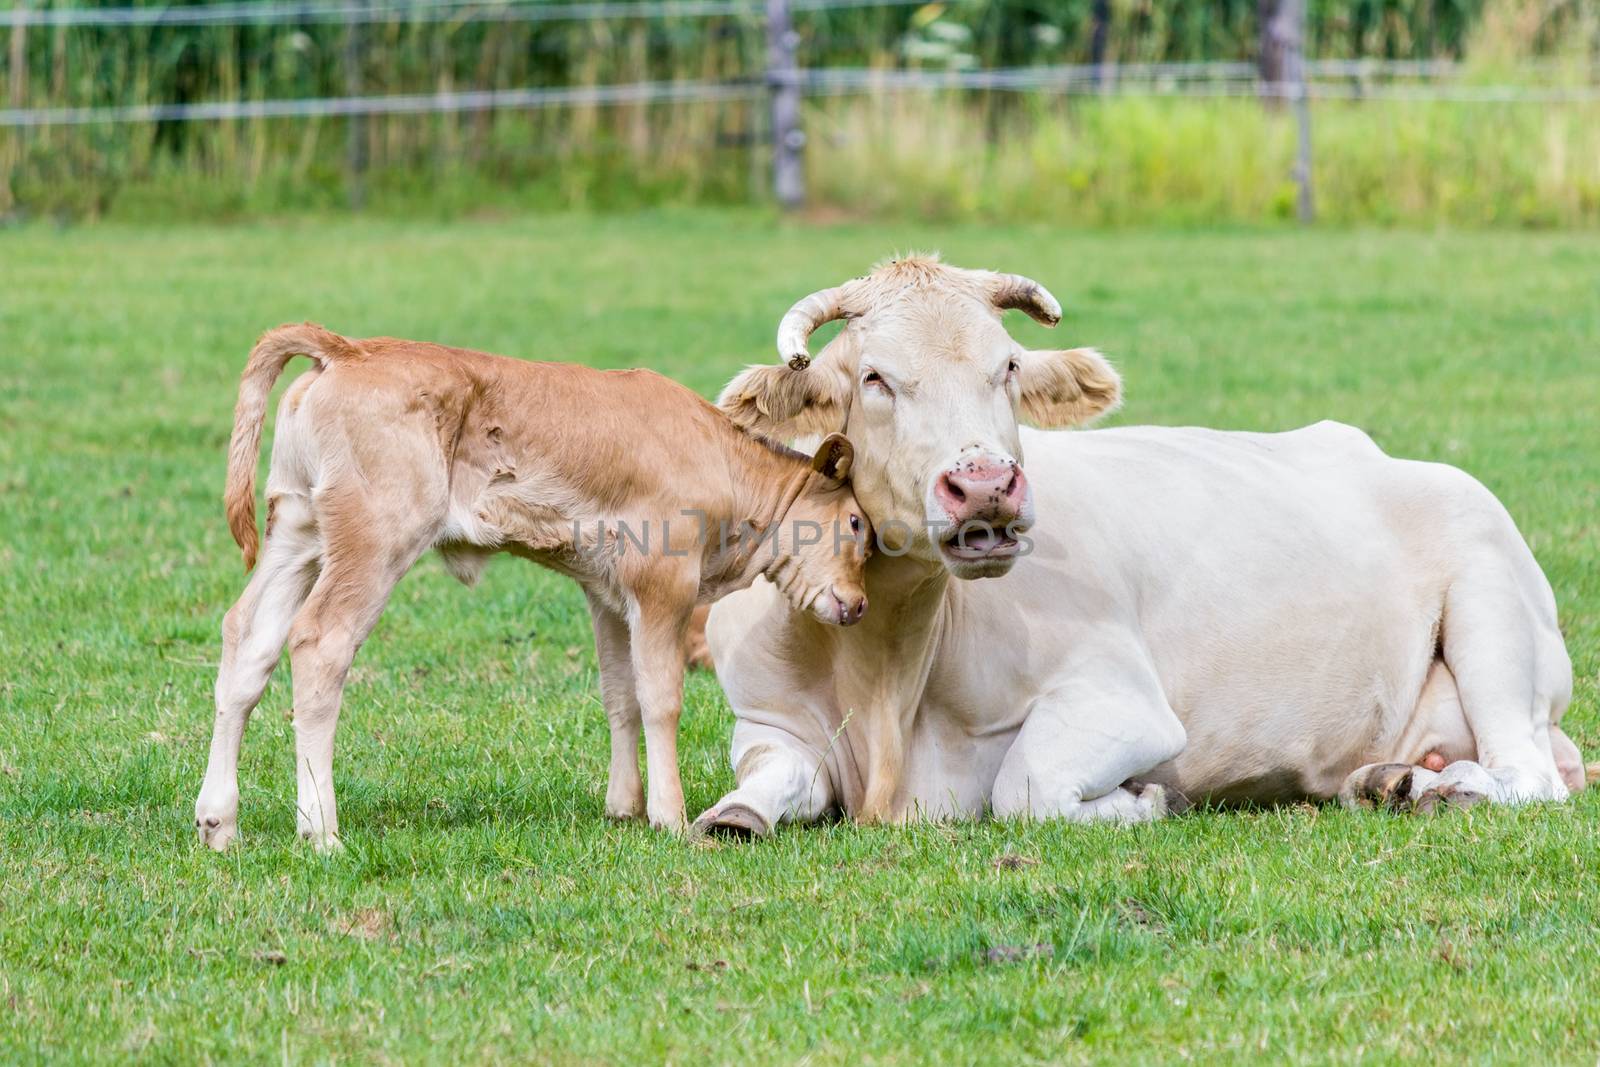 Bull calf loves mother cow in meadow by BenSchonewille